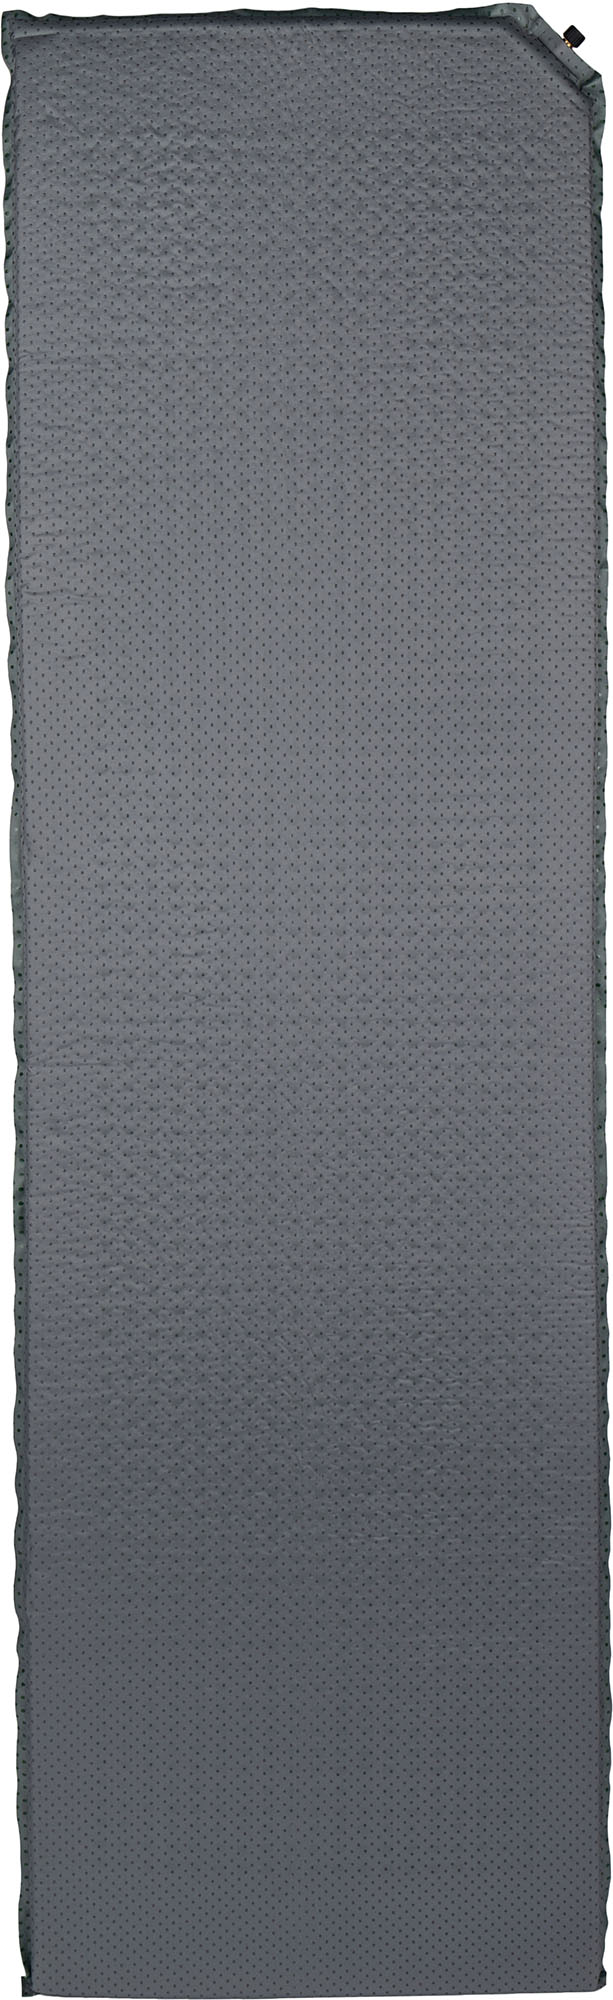 Self-inflating sleeping mat with anti-slip points